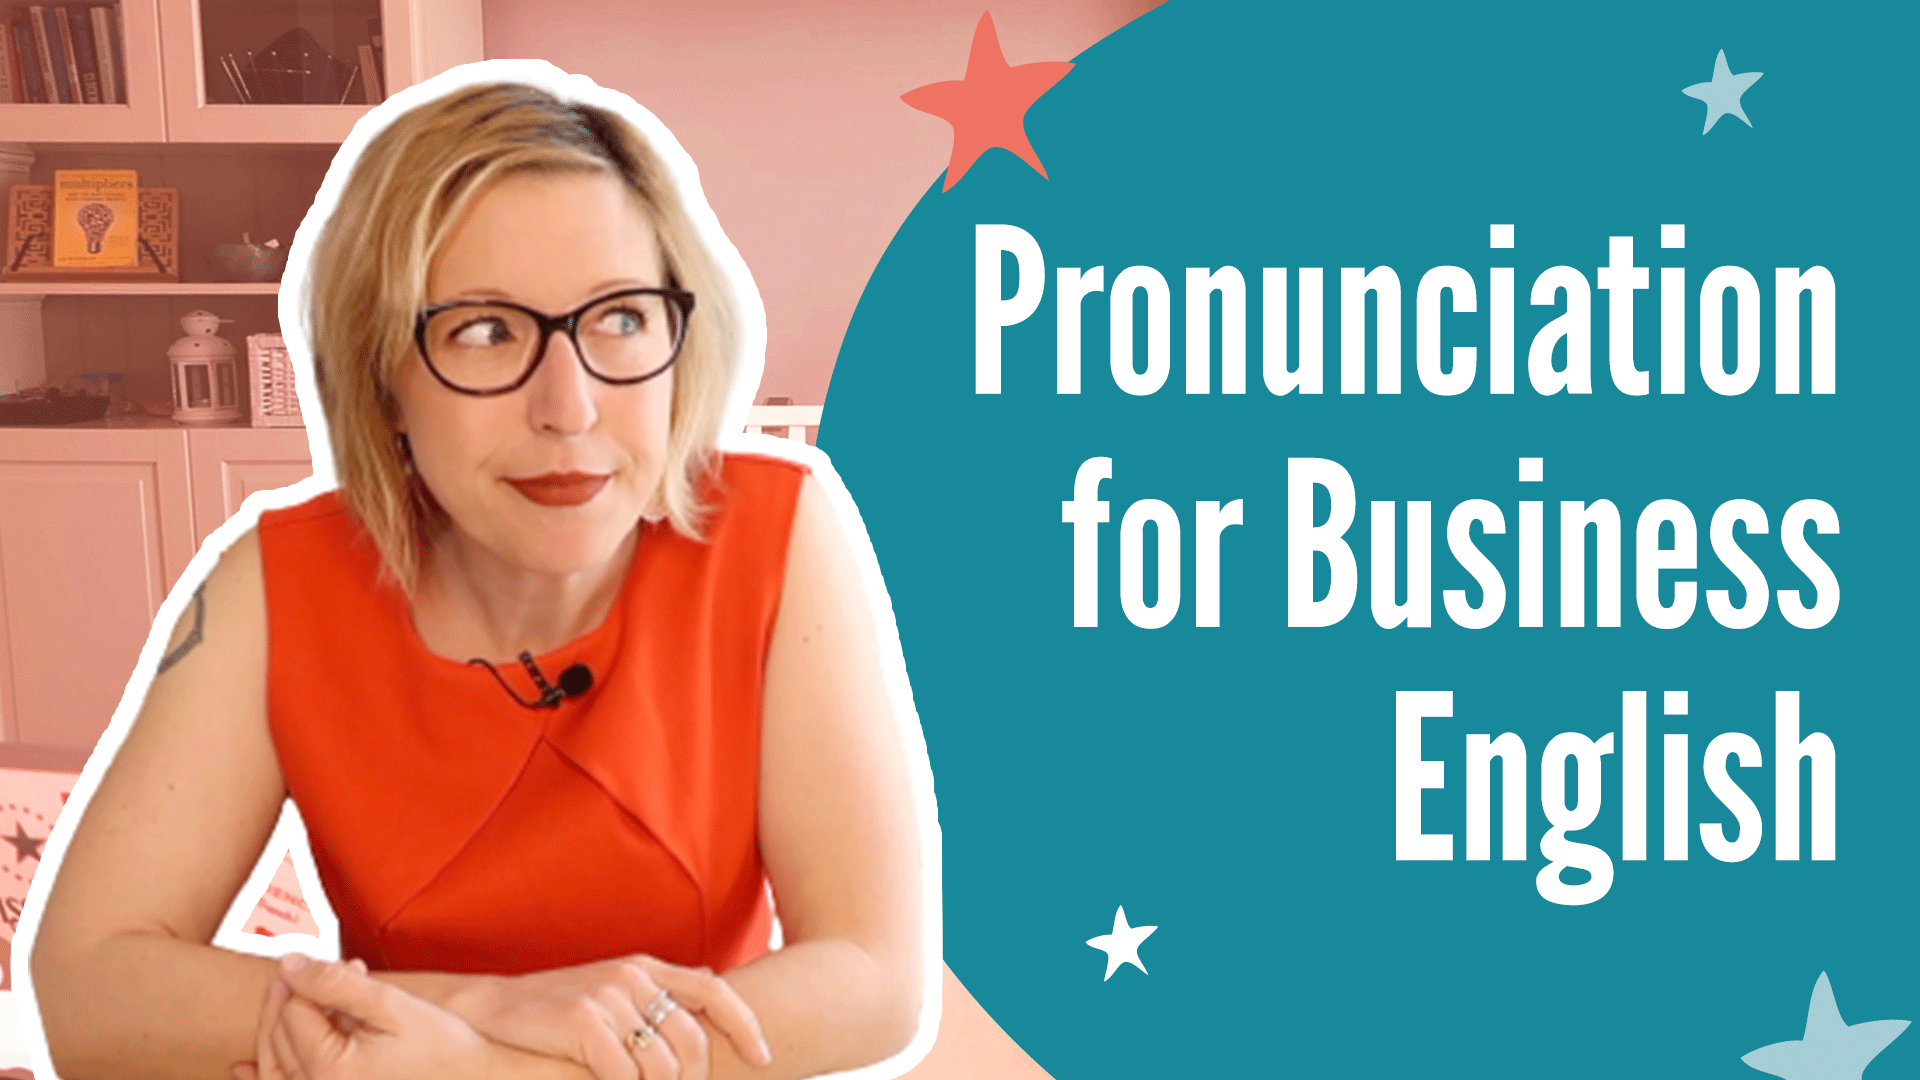 How to say 10 common business English words